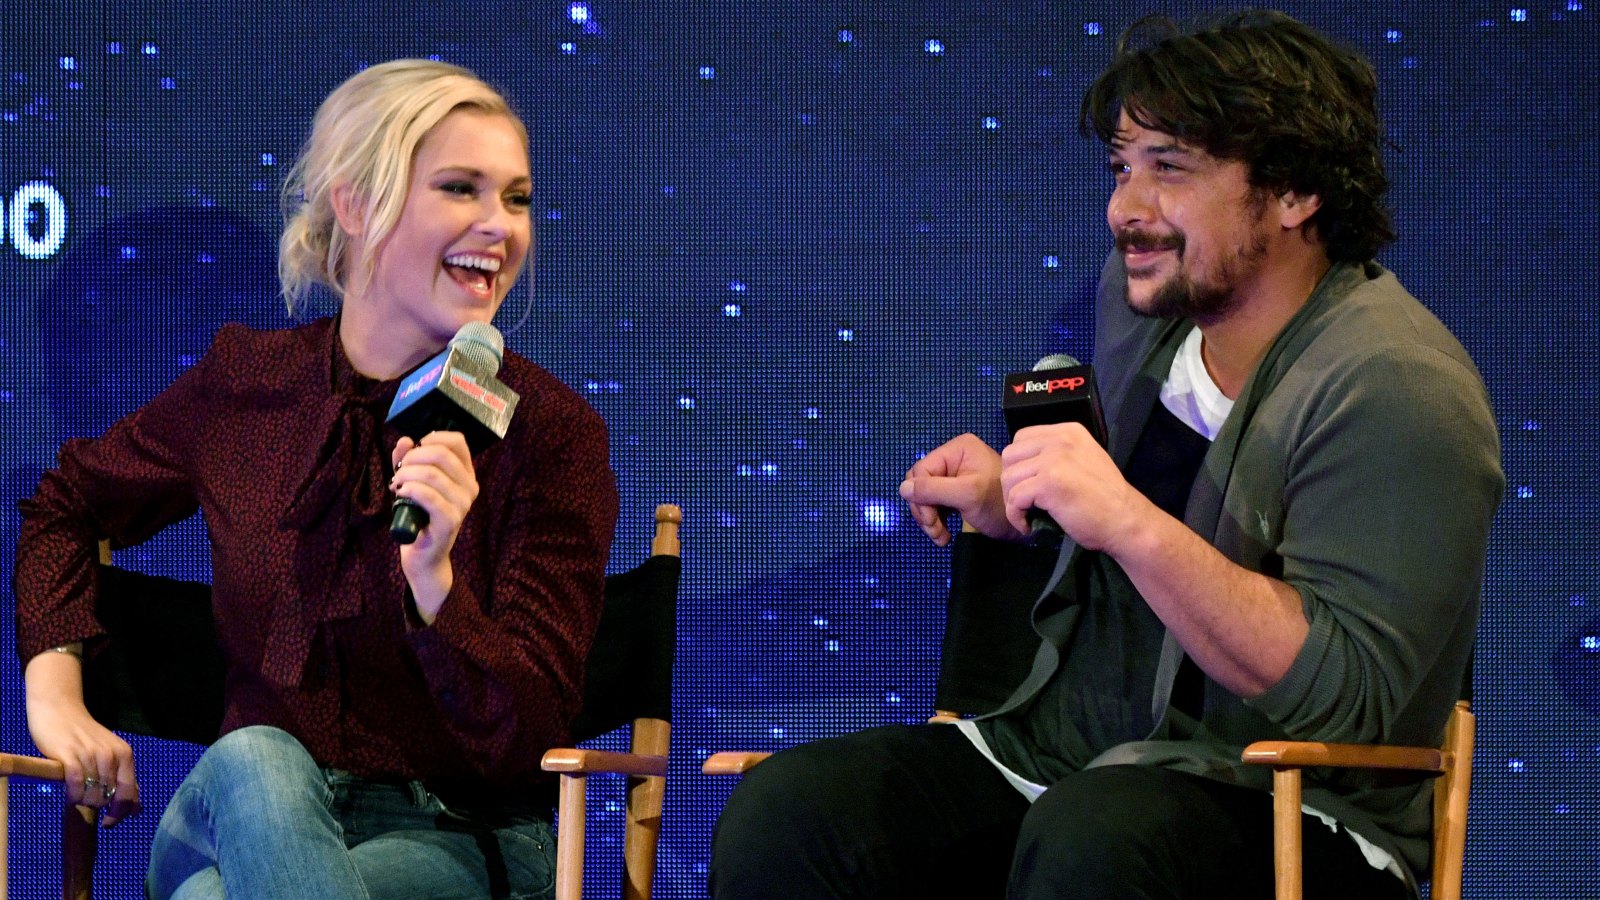 'The 100' Costars Eliza Taylor and Bob Morley Are Married